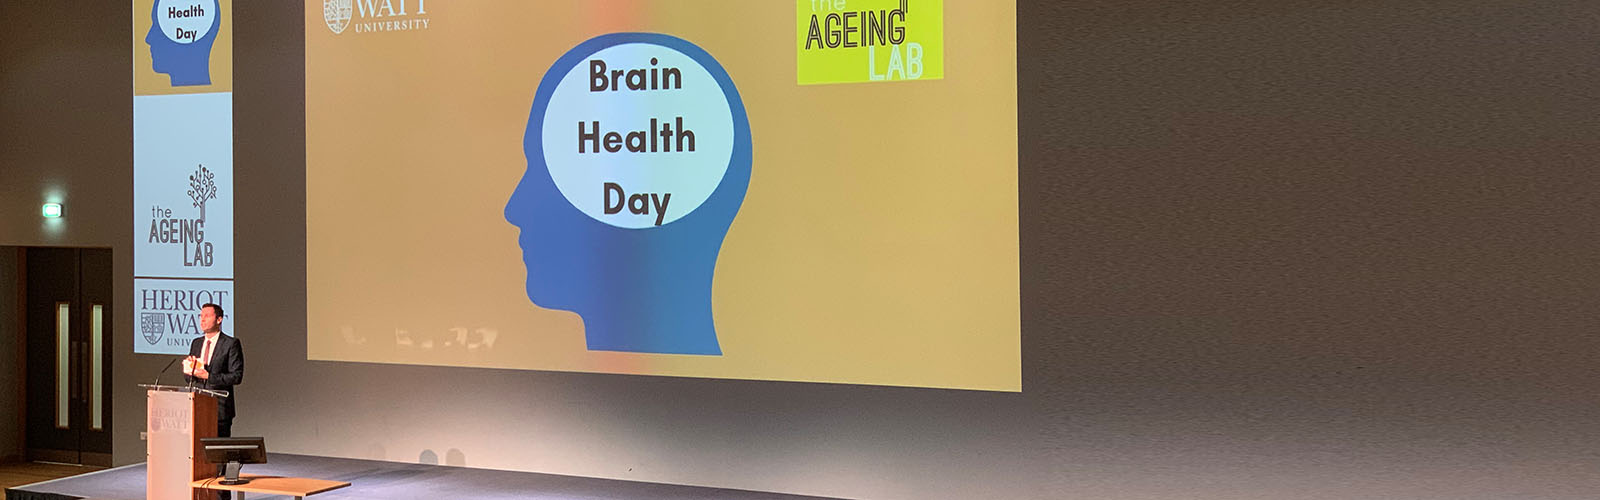 Professor Alan Gow from Heriot-Watt University stands in front of a screen with the headline 'Brain Health Day' showing